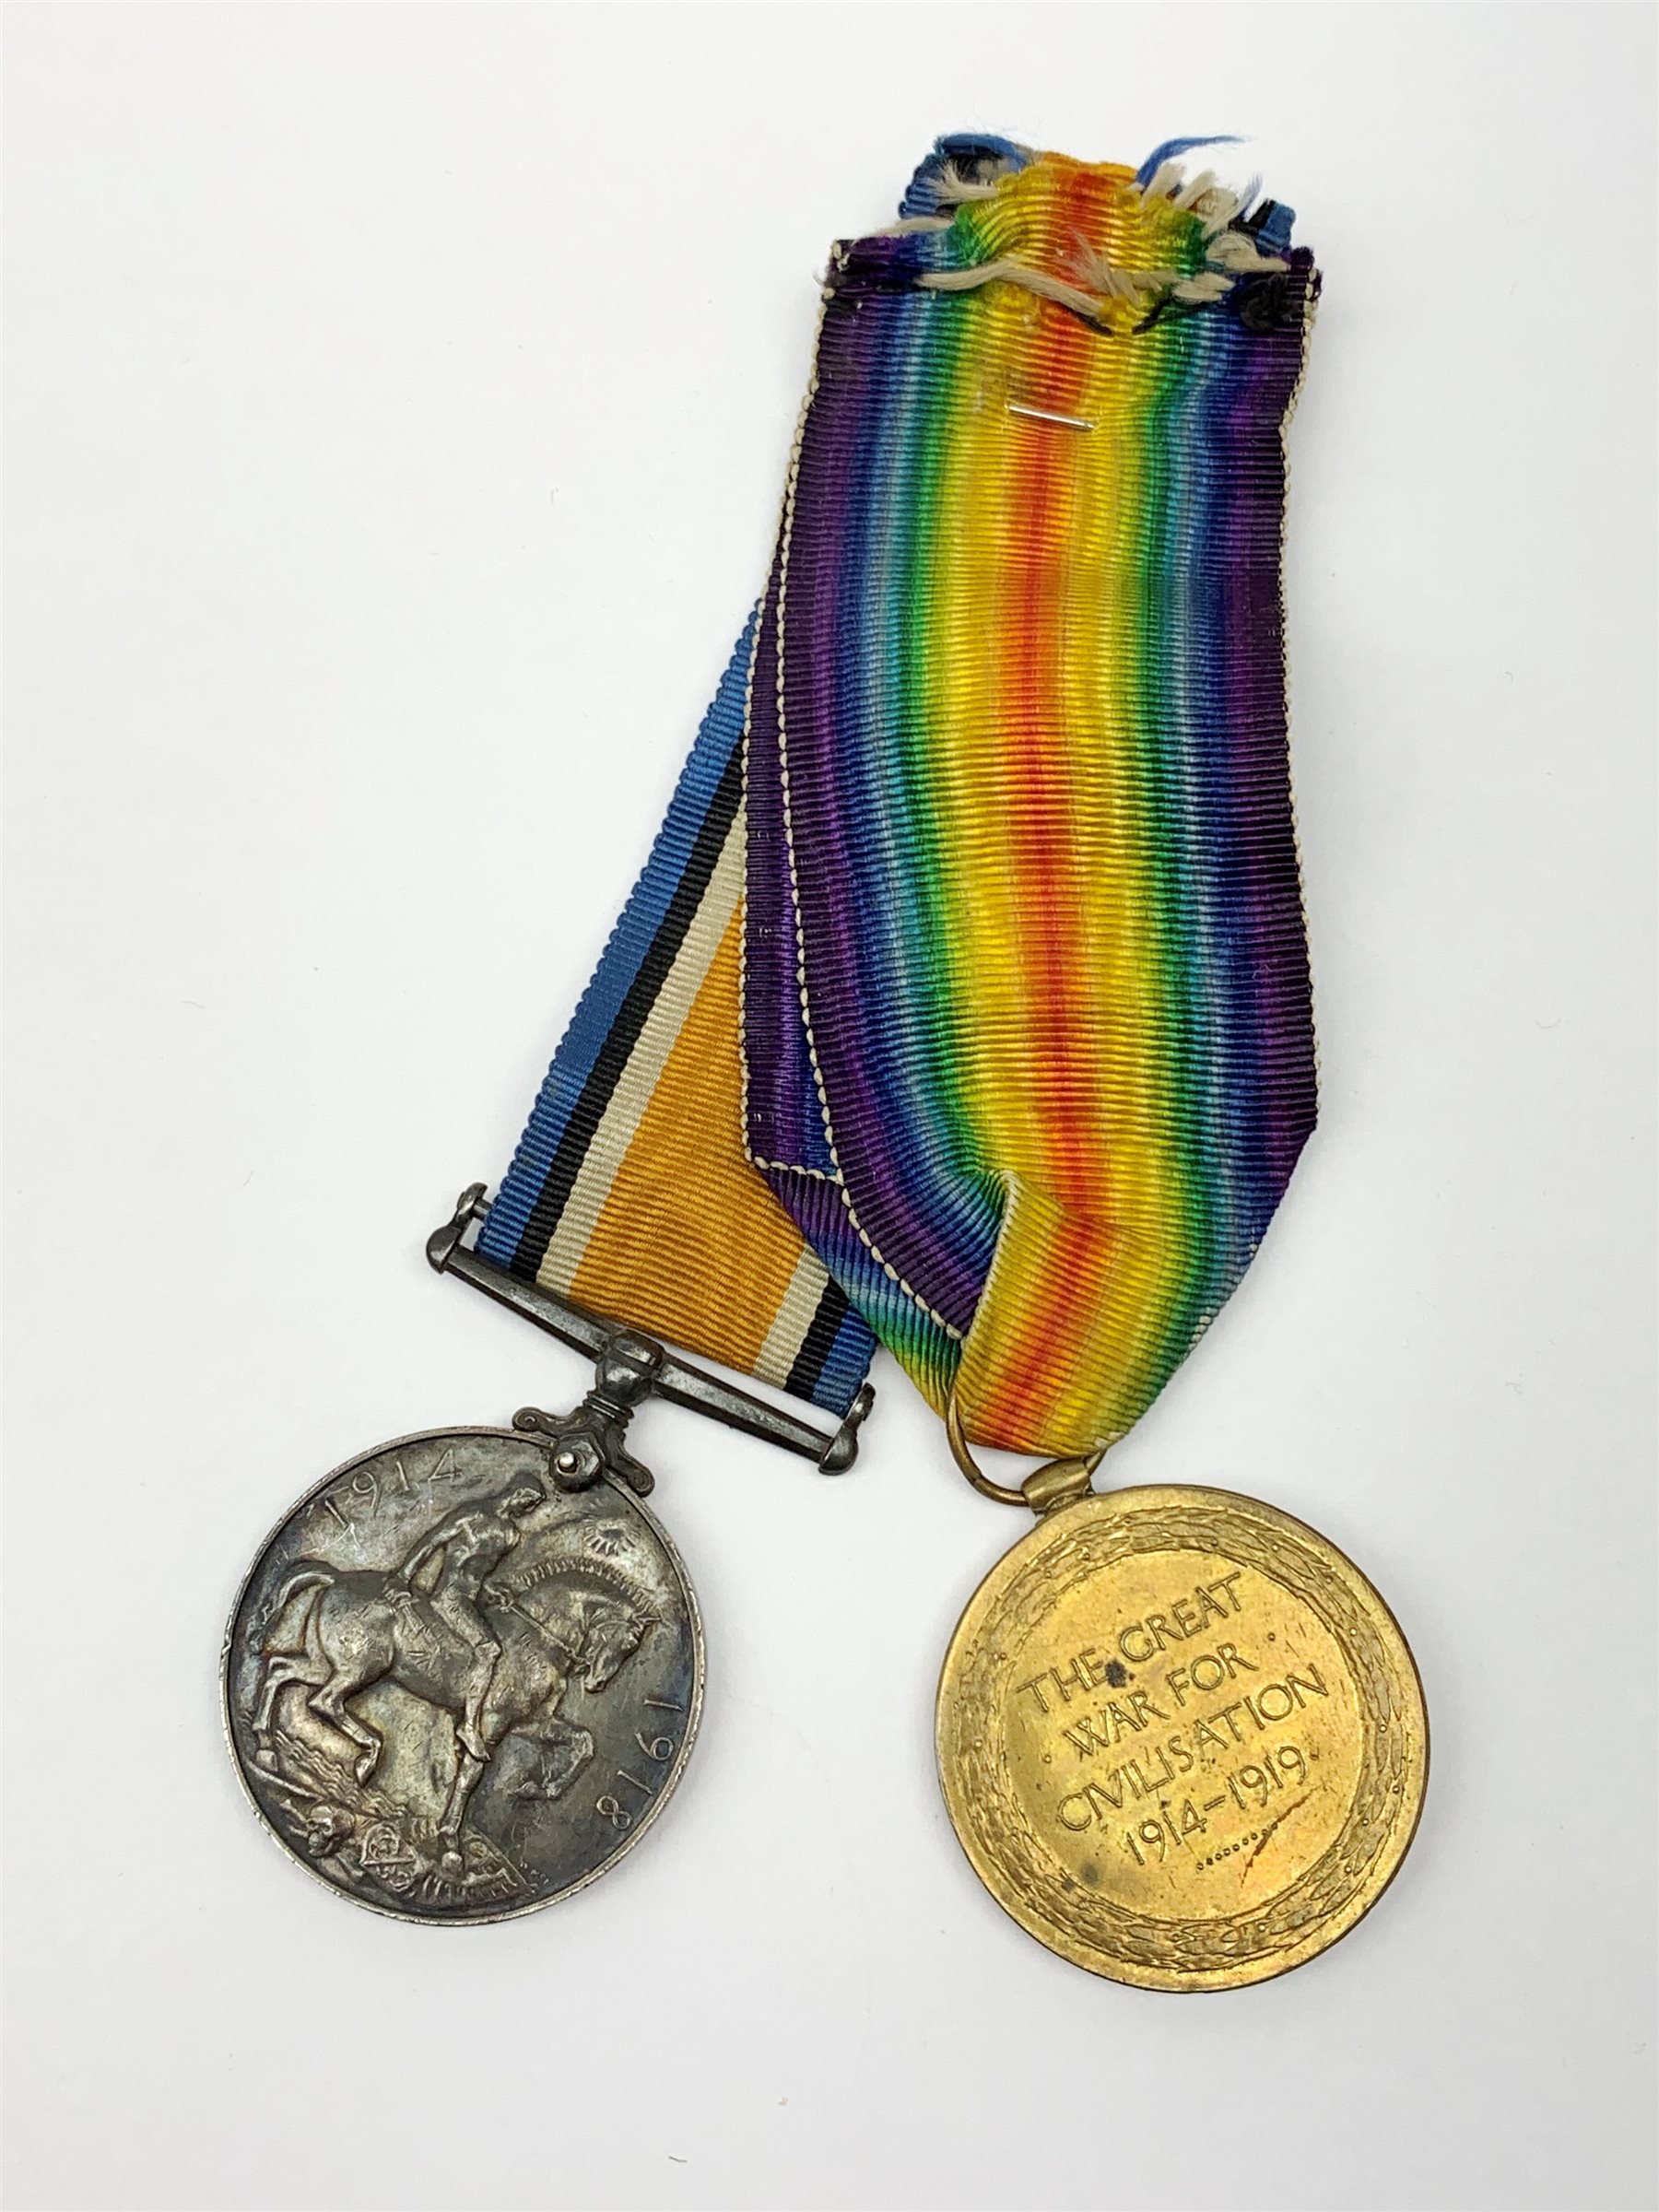 WW1 pair of medals comprising British War Medal and Victory Medal awarded to 151870 Gnr. J.W. Wass R - Image 3 of 8